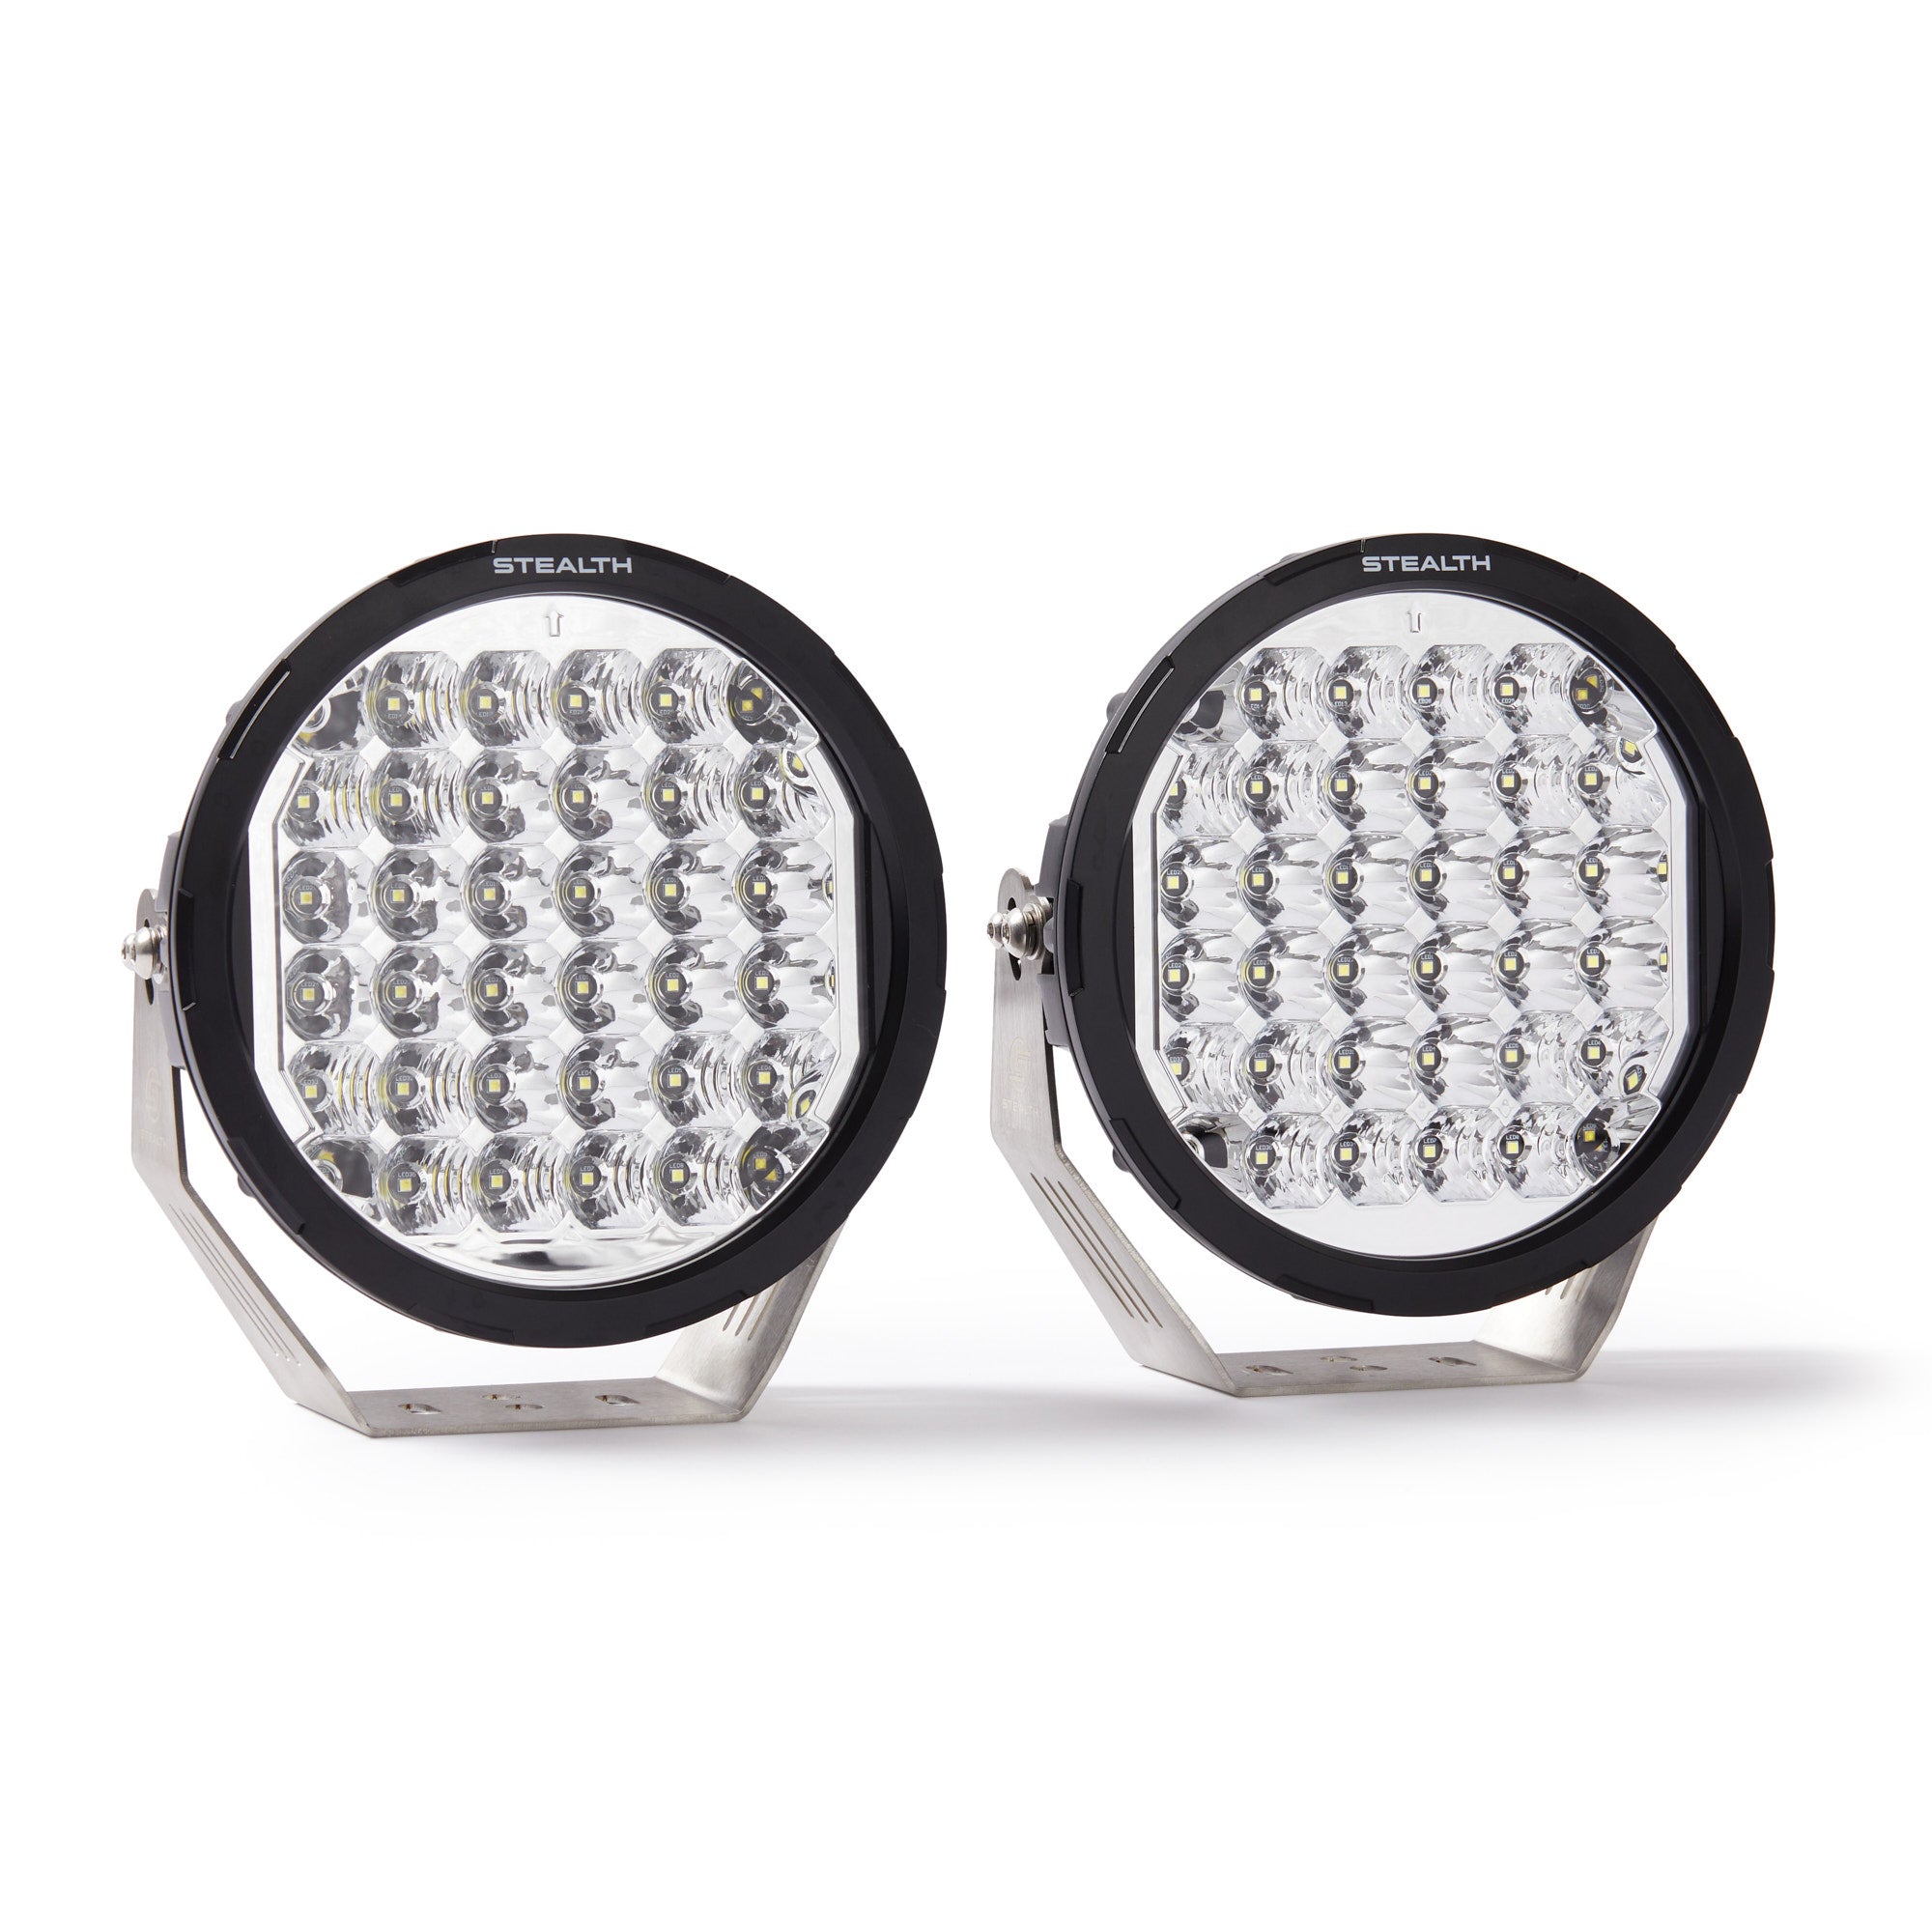 8.5" Stealth R Series LED Driving Lights